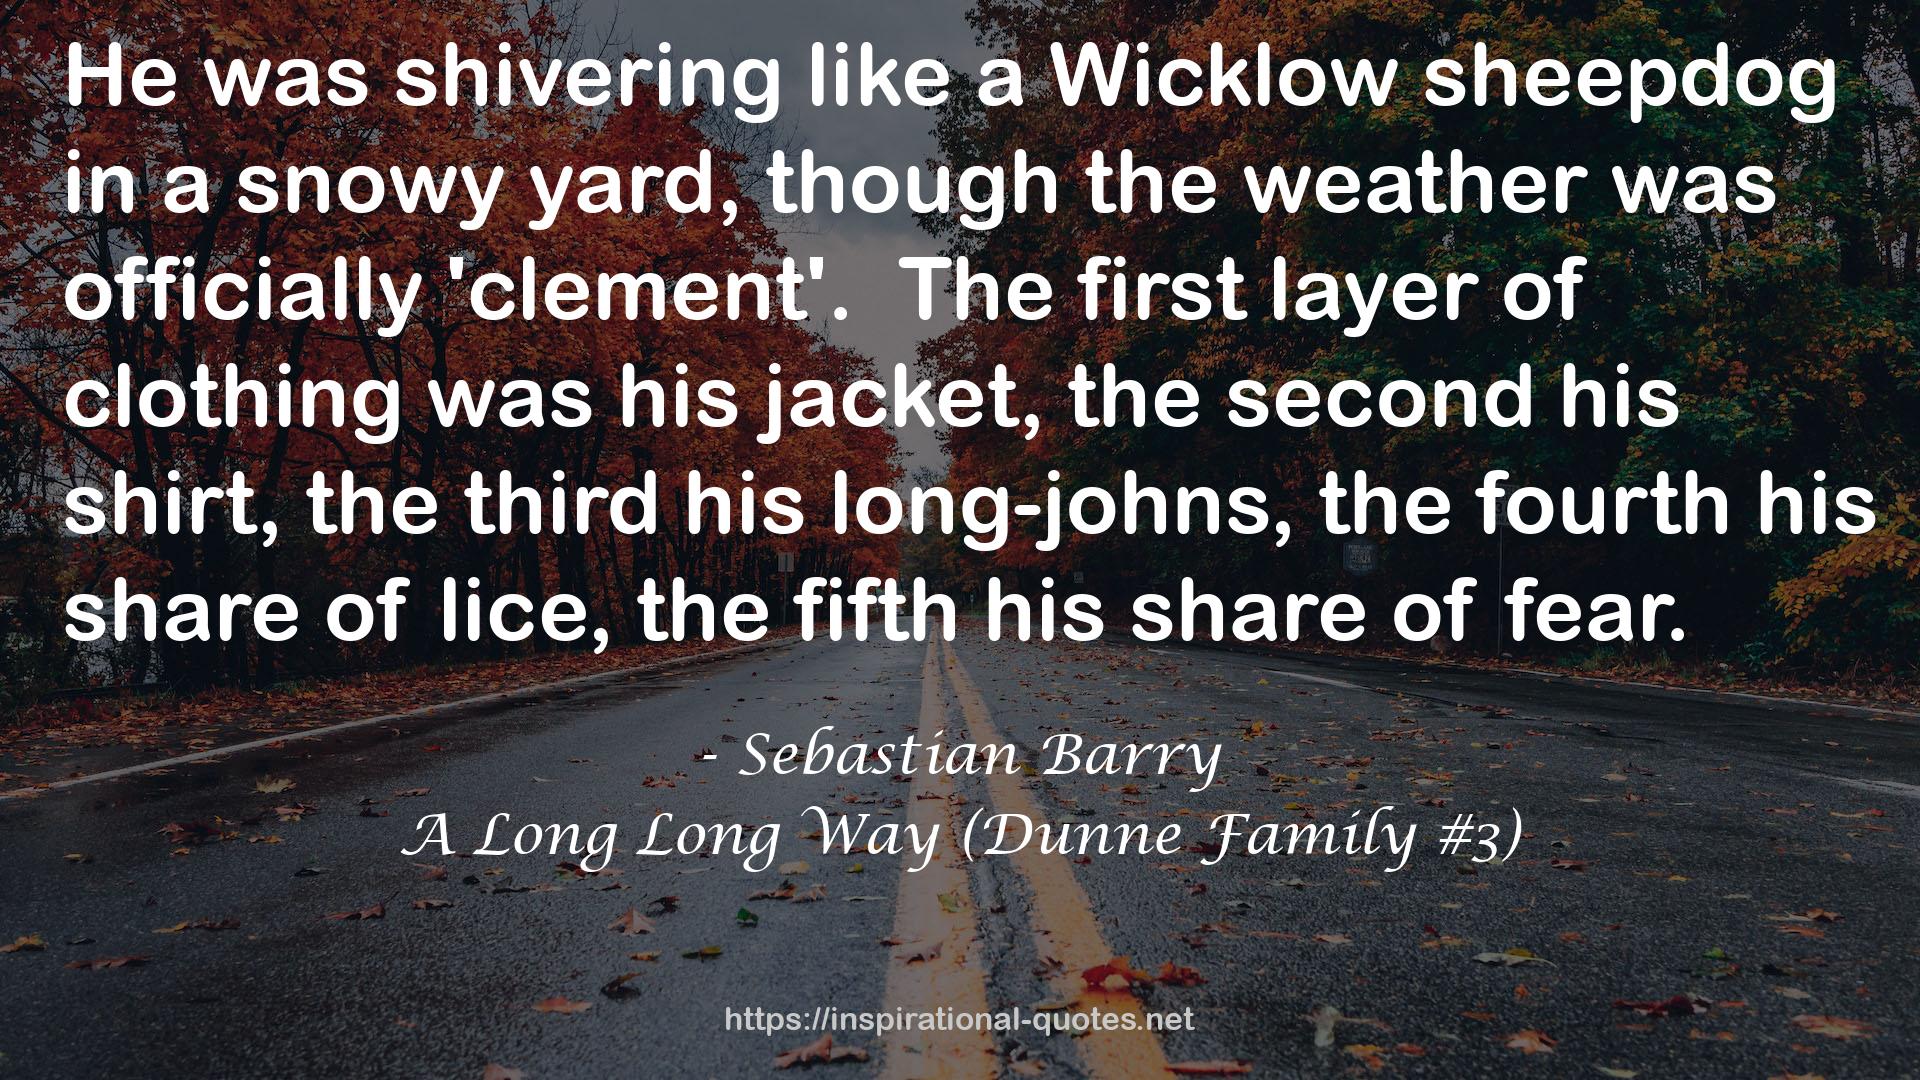 A Long Long Way (Dunne Family #3) QUOTES